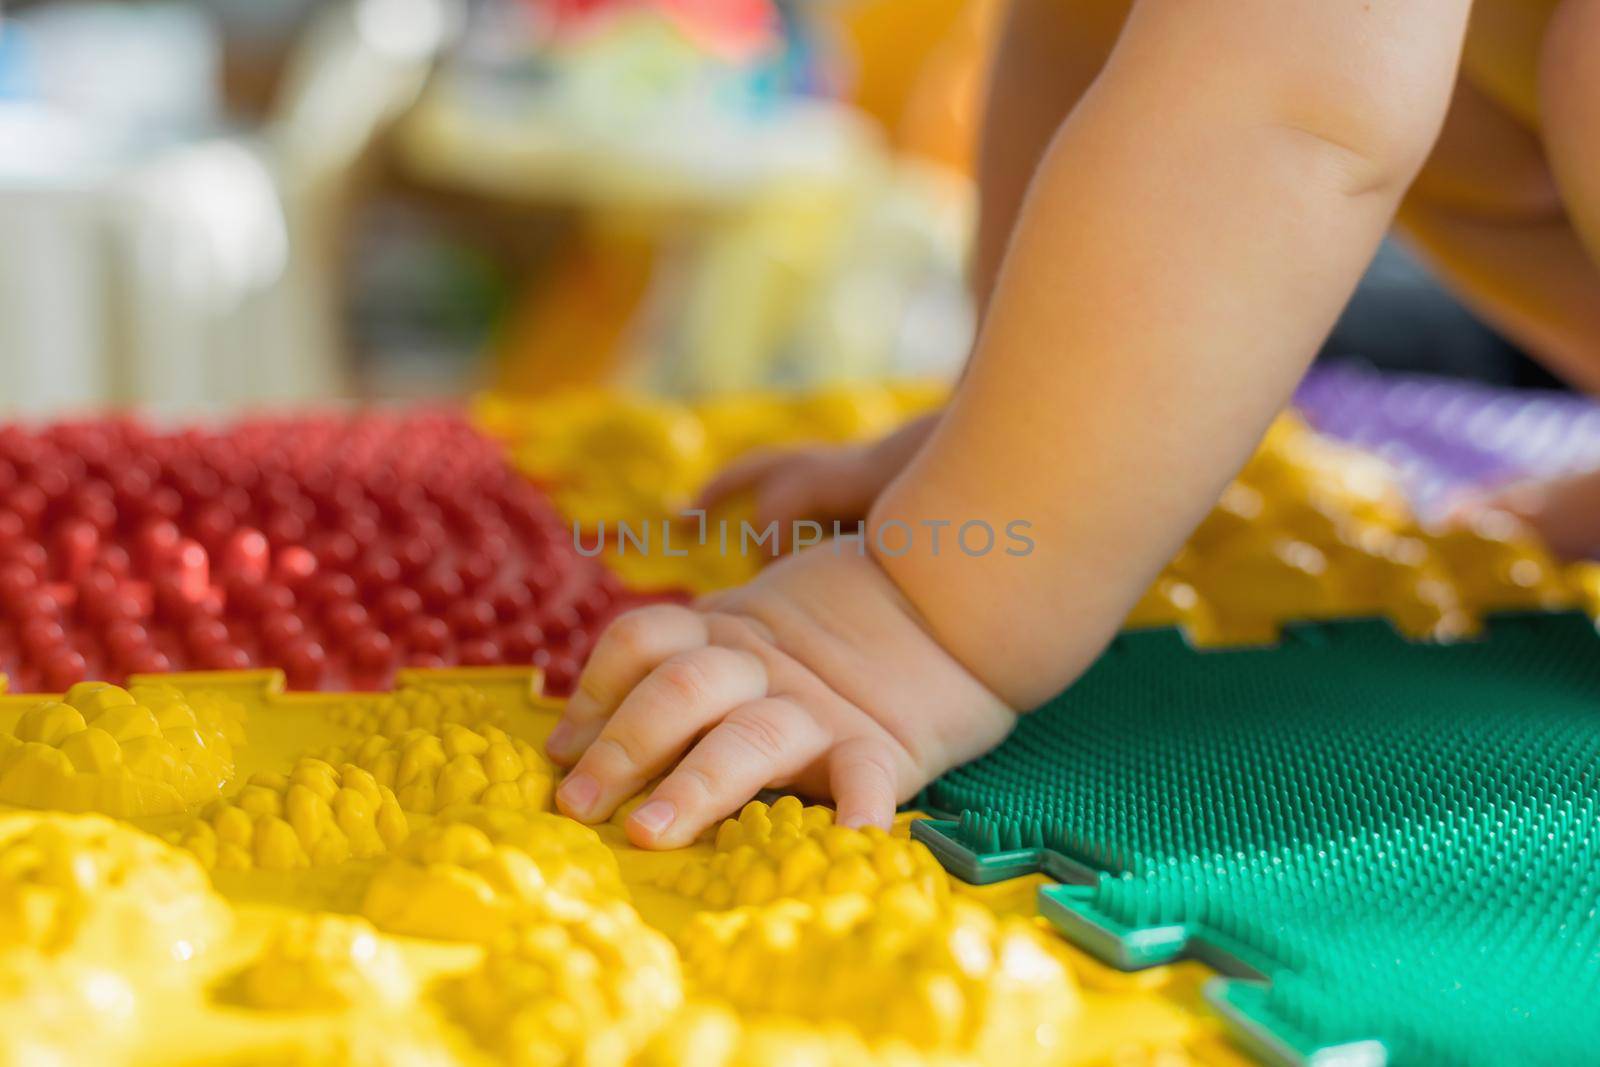 The kid walks barefoot on multi-colored massage rugs. by Yurich32